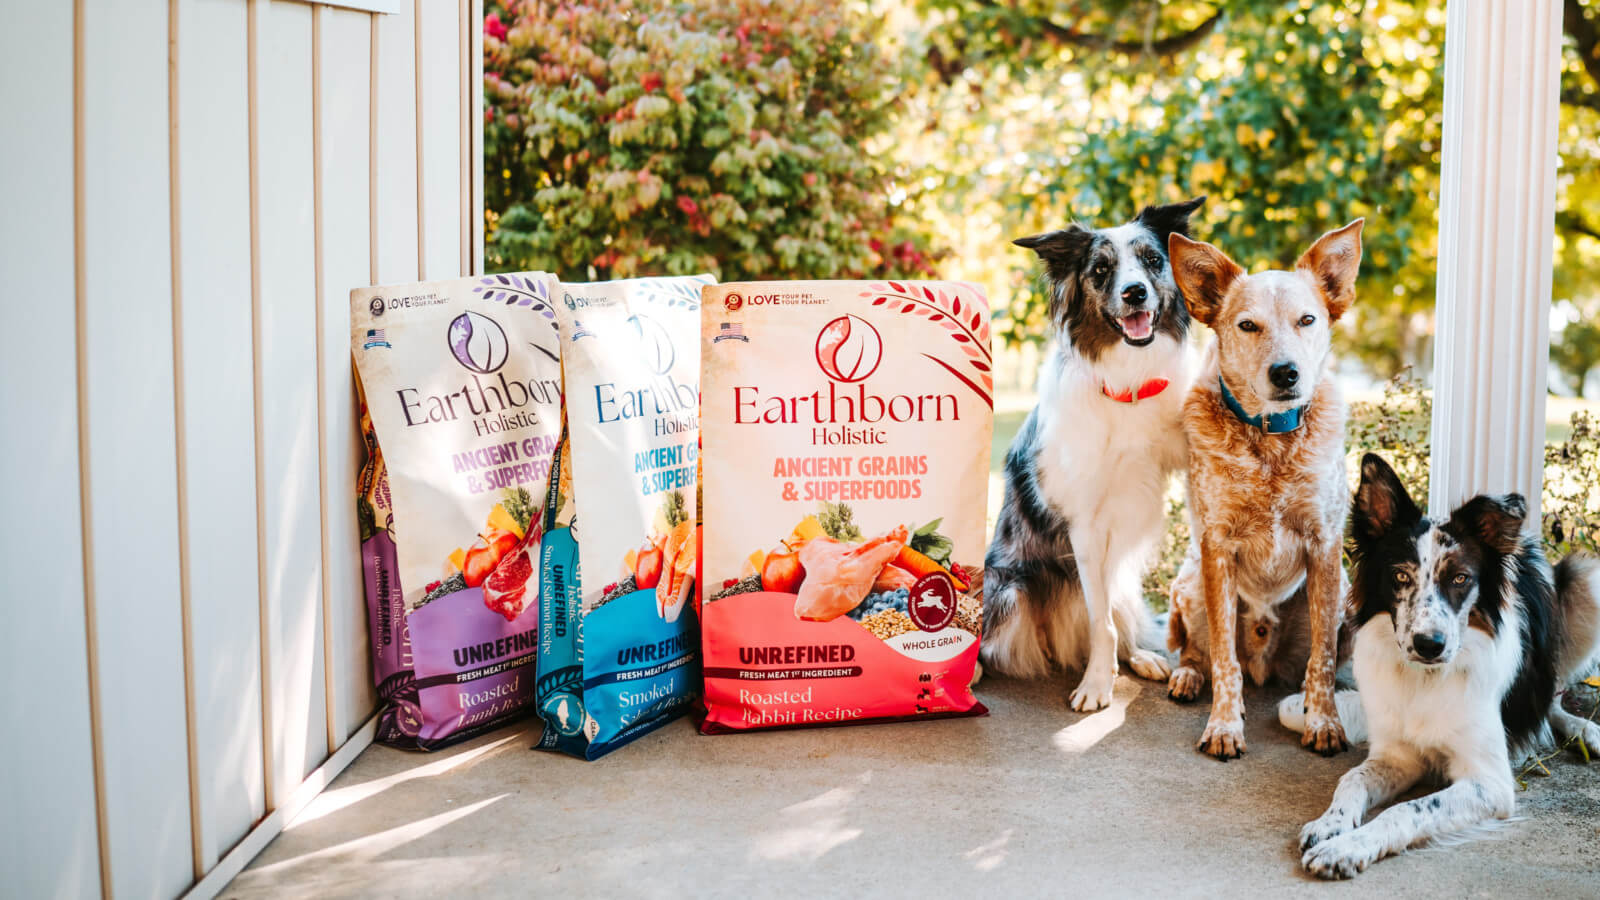 A group of three dogs sit on a porch next to three bags of Earthborn Holistic ancient grains dog food